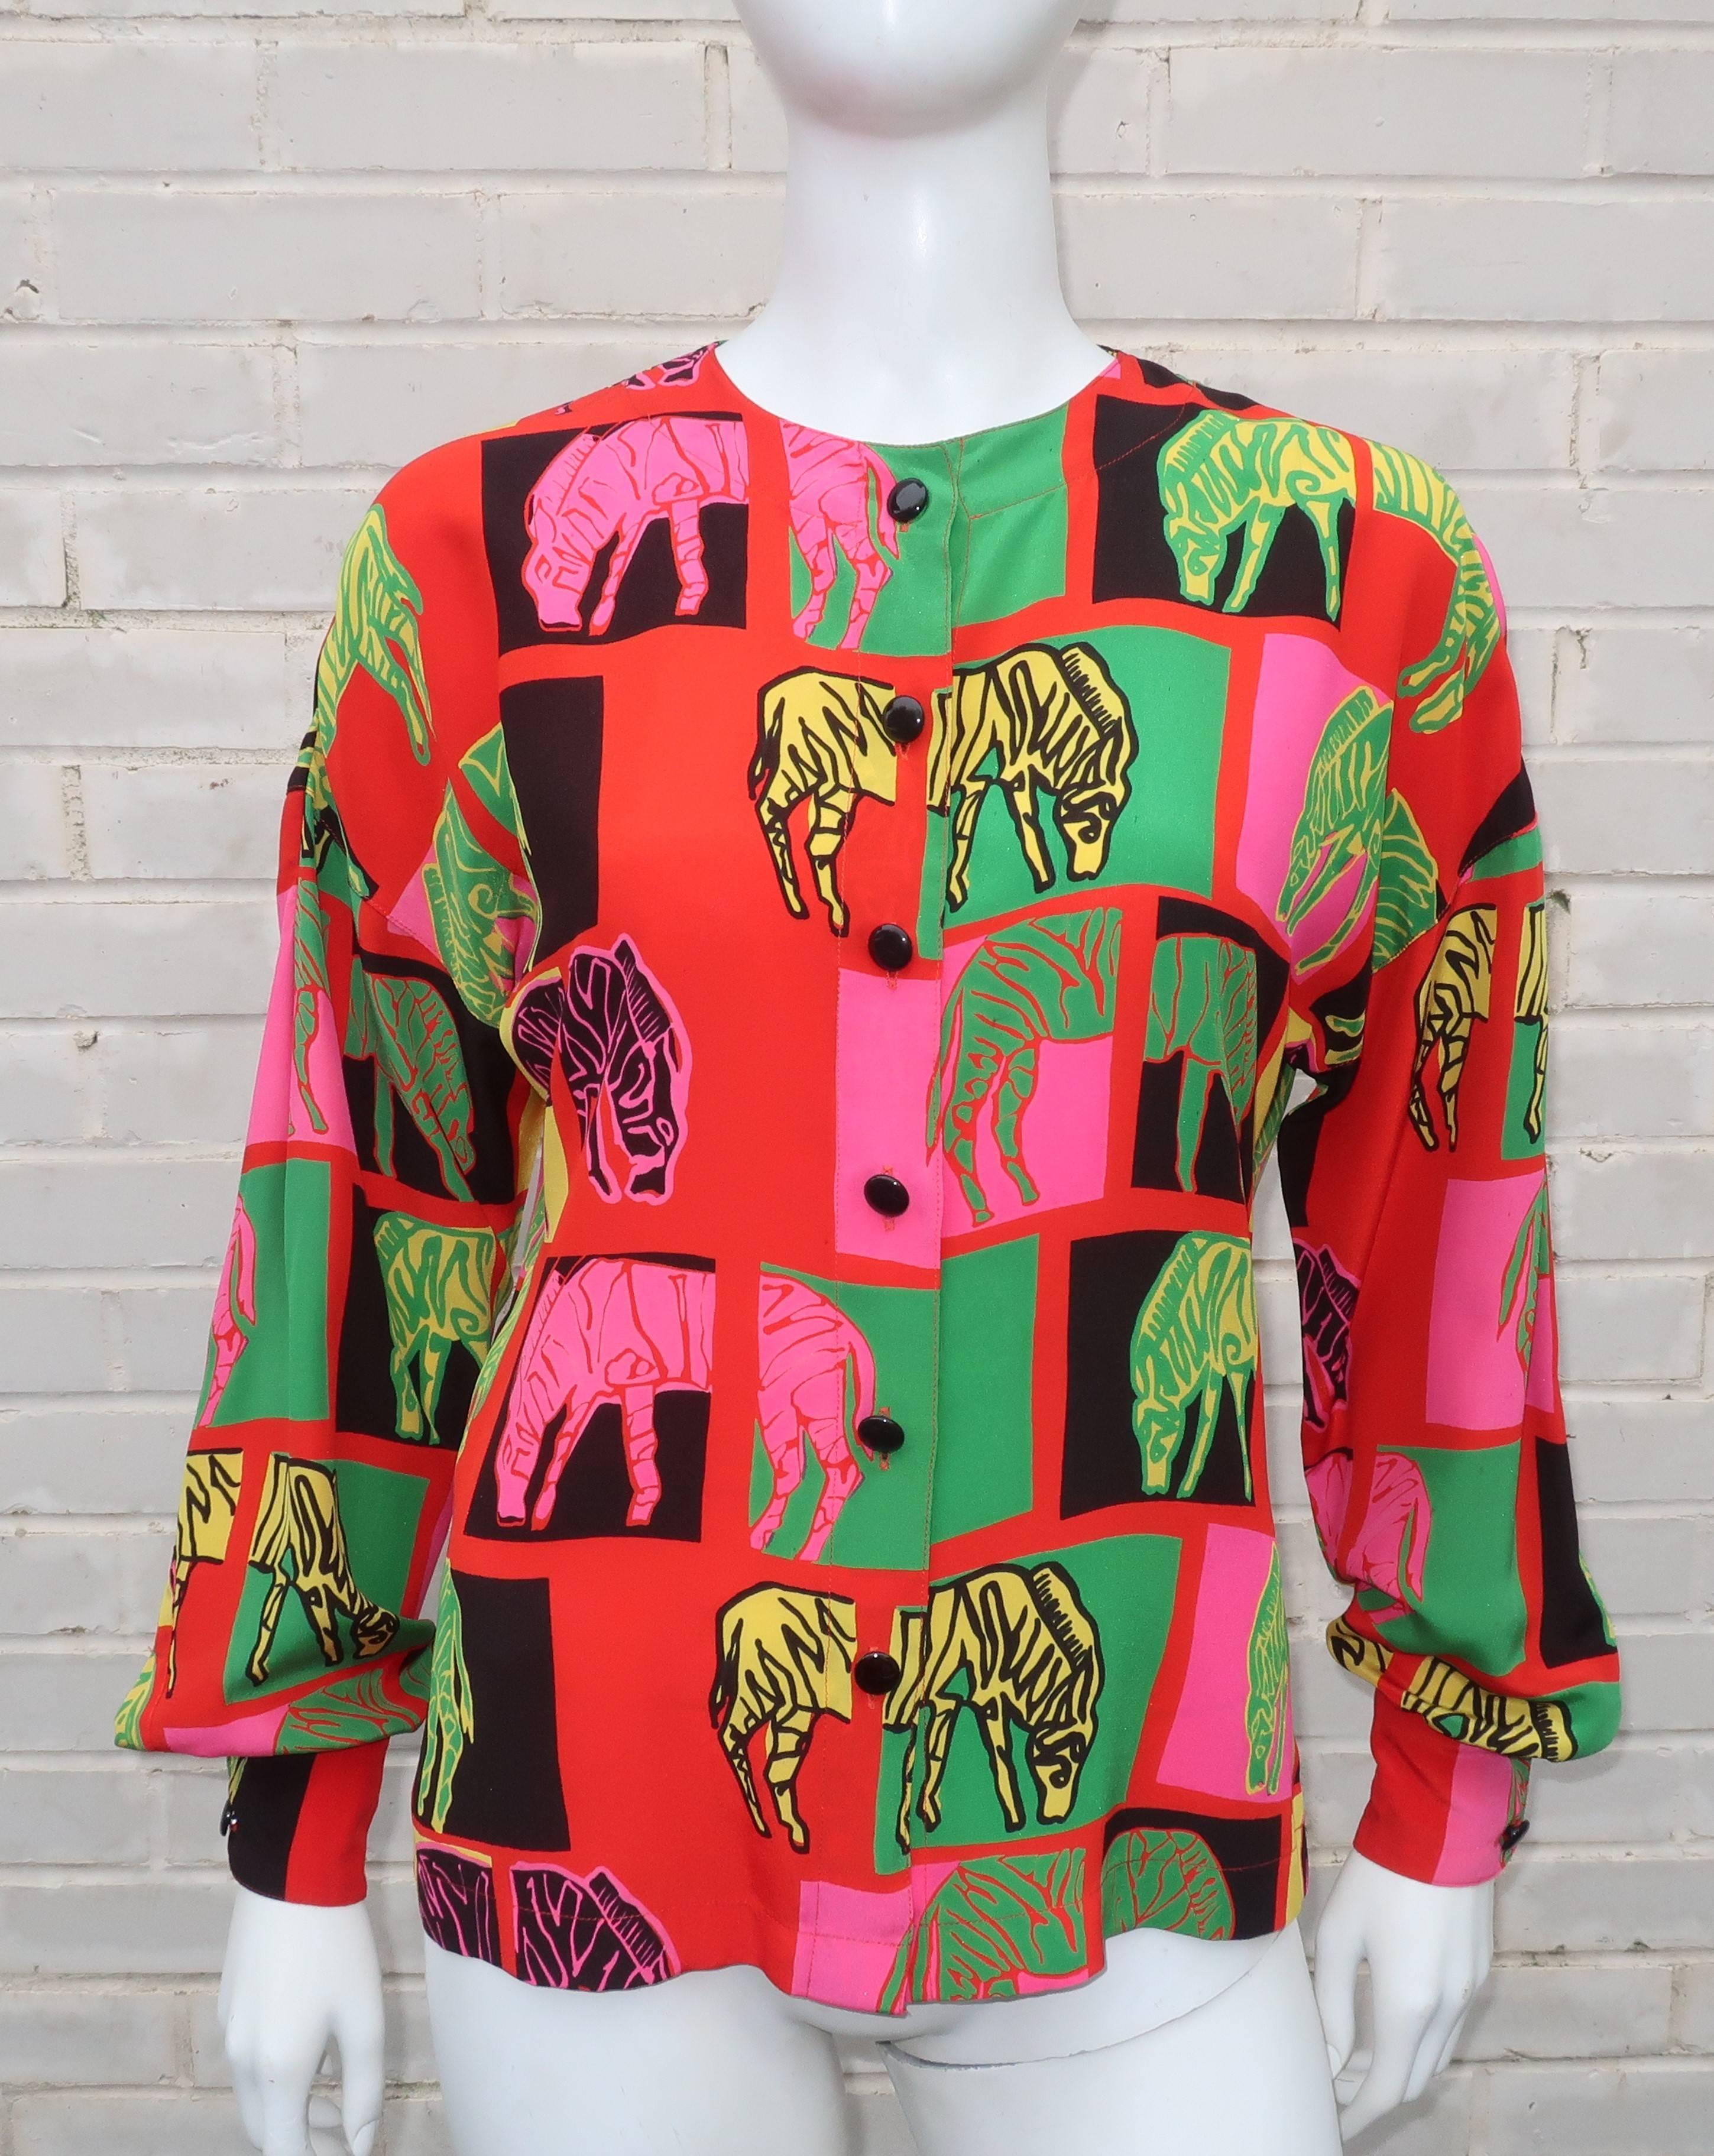 Pop art at its finest!  This Margaretha Ley silk blouse for Escada has graphic animal print images in neon colors reminiscent of Andy Warhol's art from an earlier era.  The beautifully made silk blouse buttons at the front with a rounded shoulder